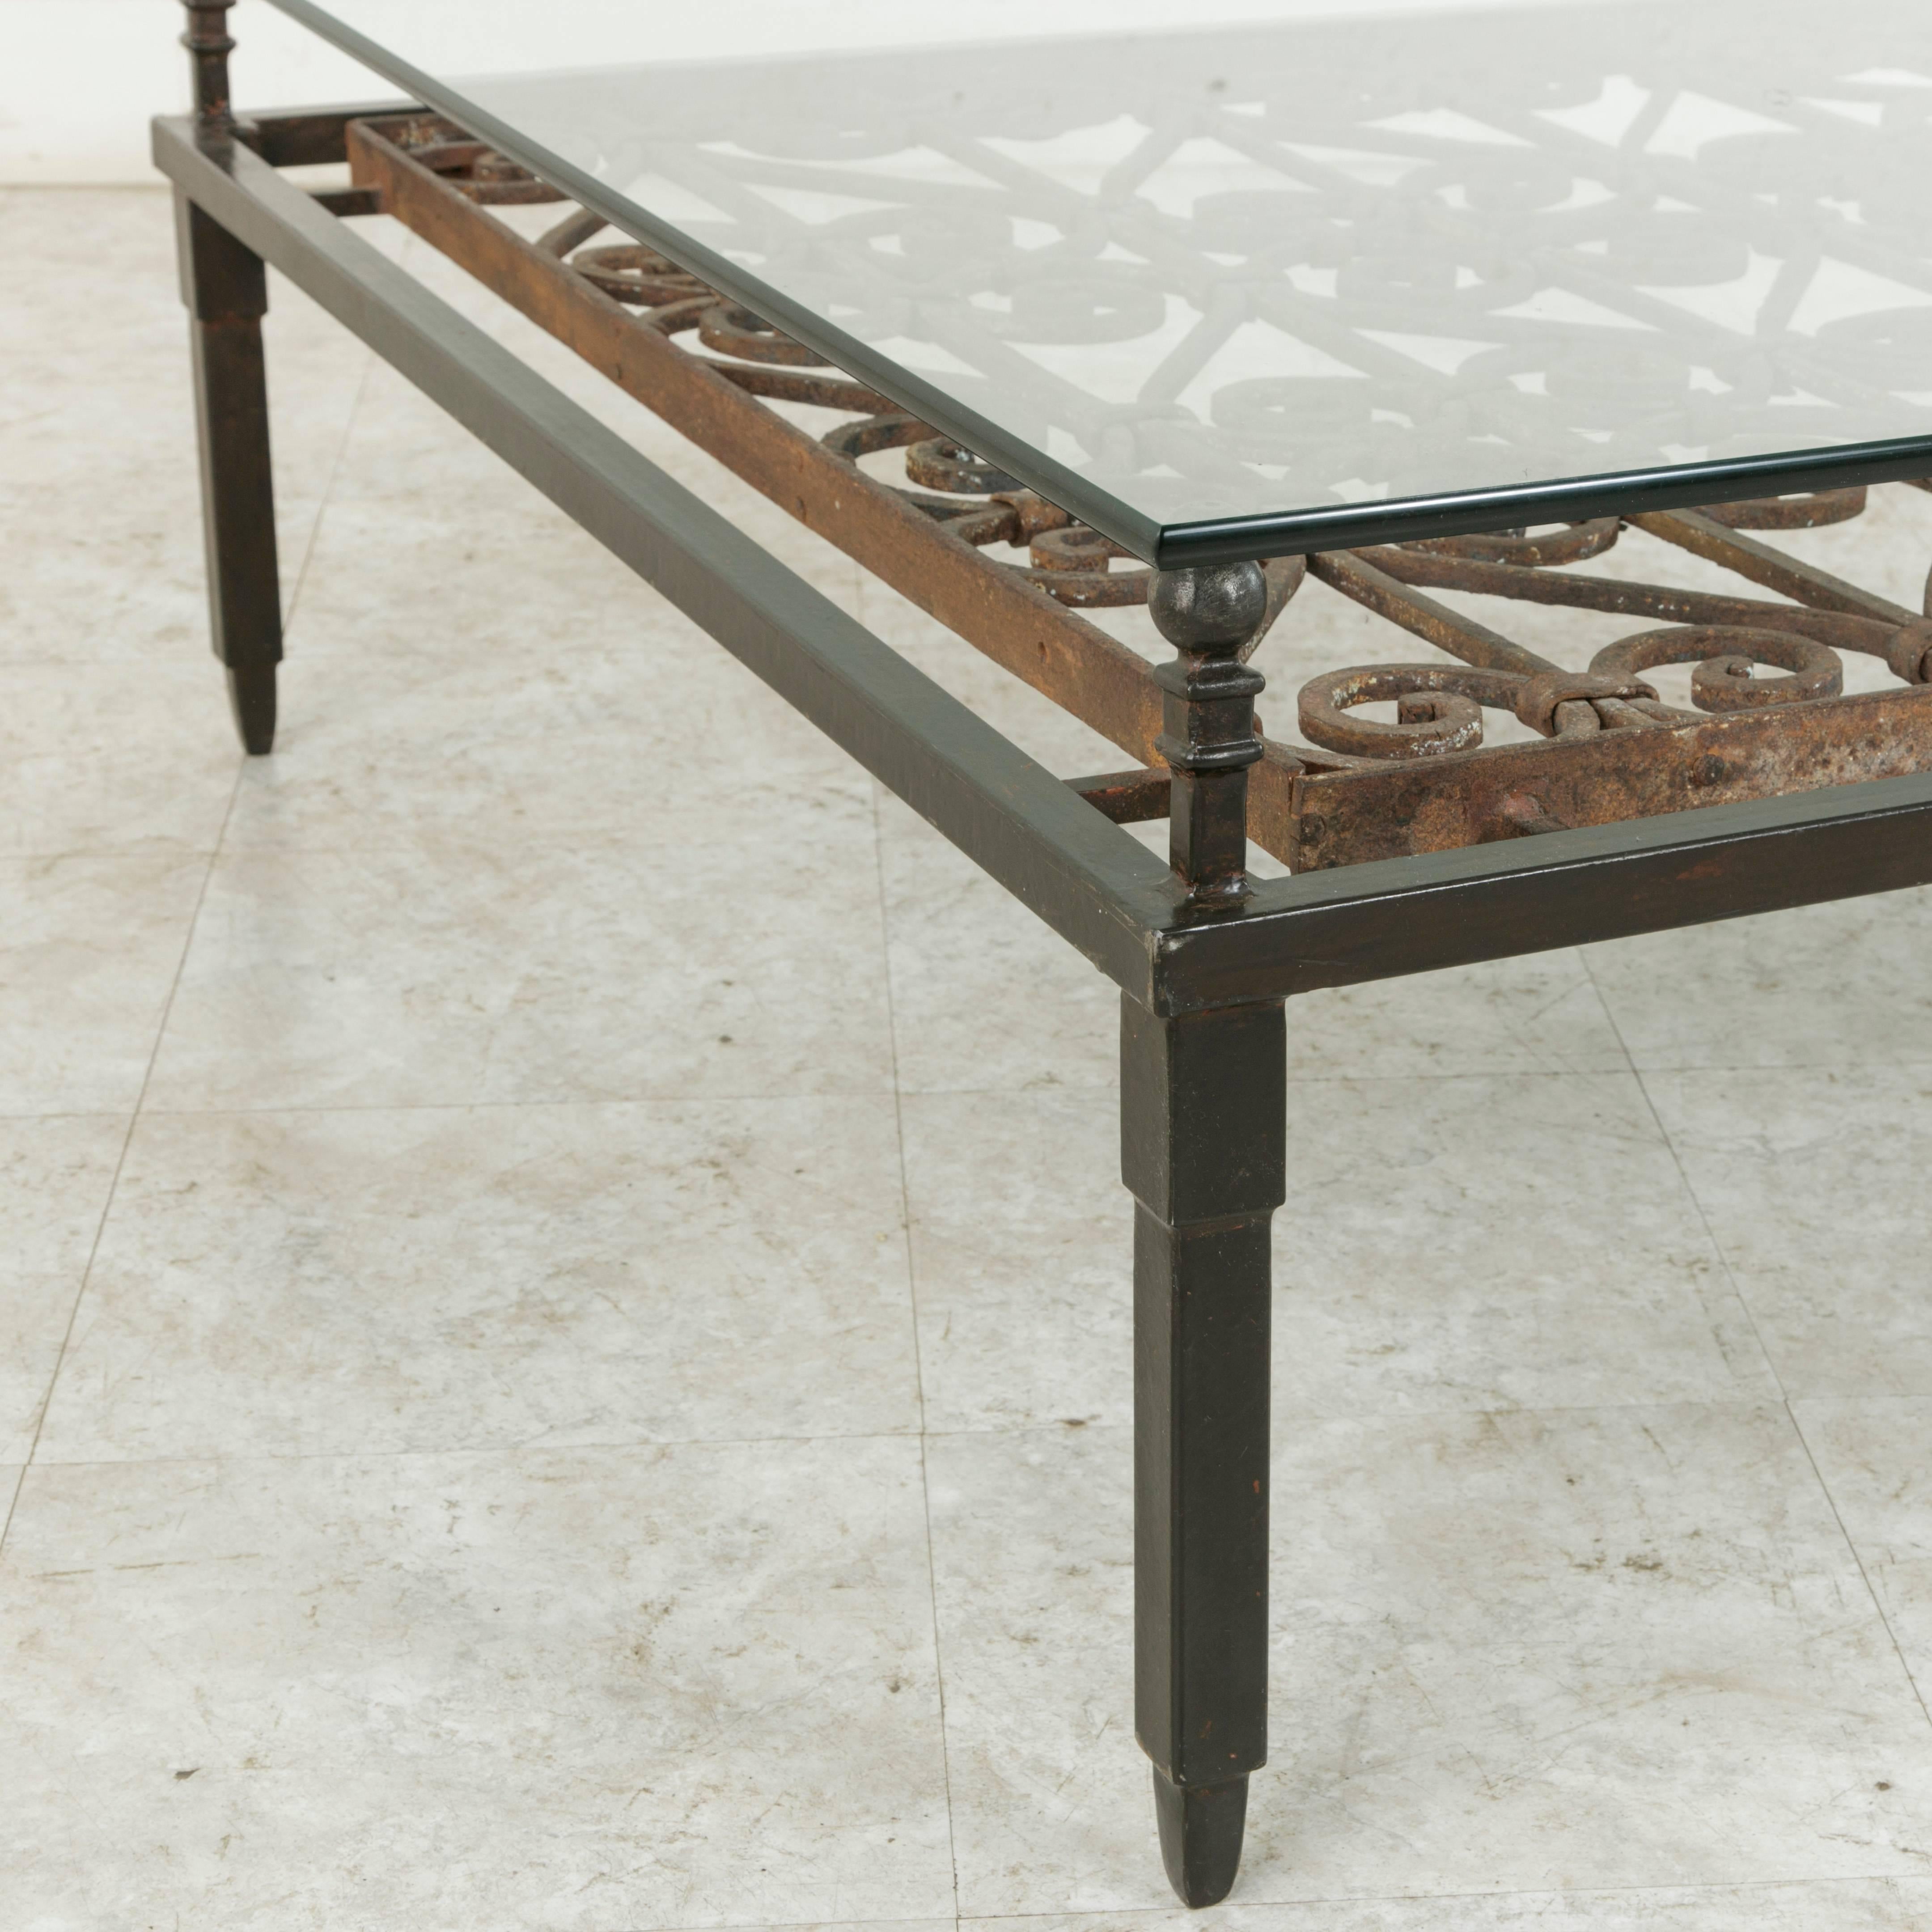 Large 18th Century Forged Iron Grill Converted into Coffee Table with Glass Top 4